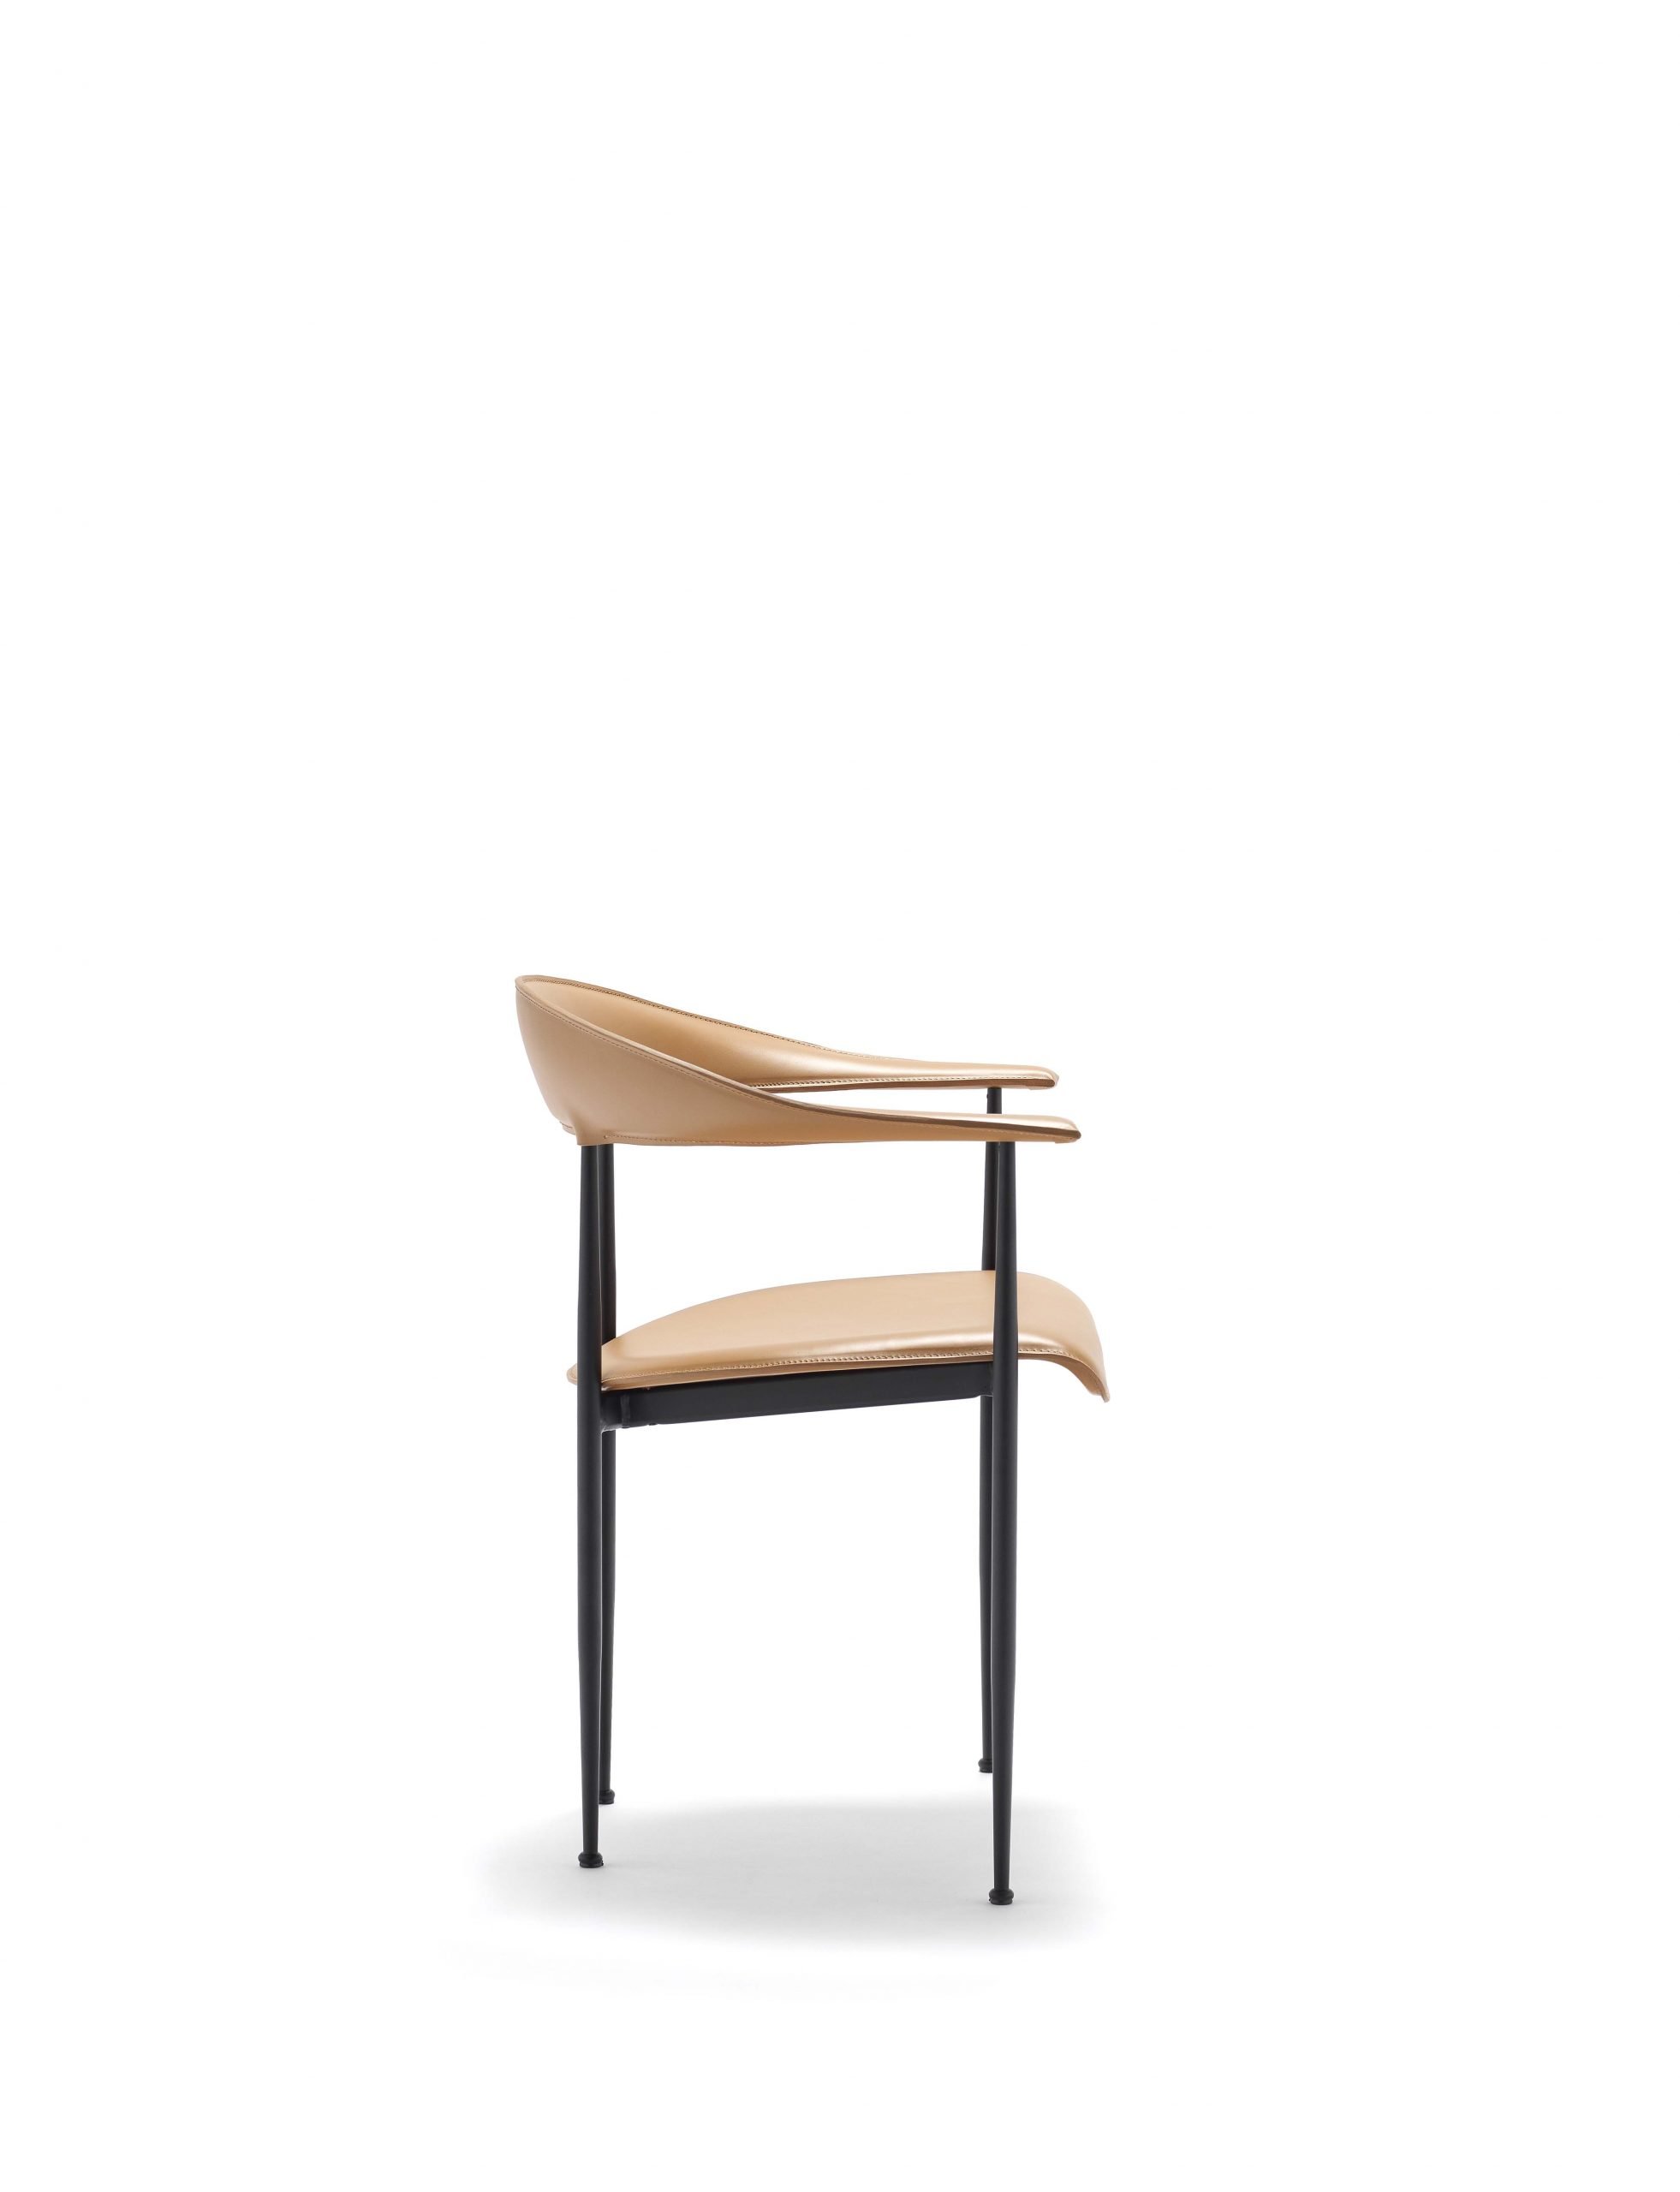 P40 Armchair from Fasem, designed by Gianfranco Gualtierotti